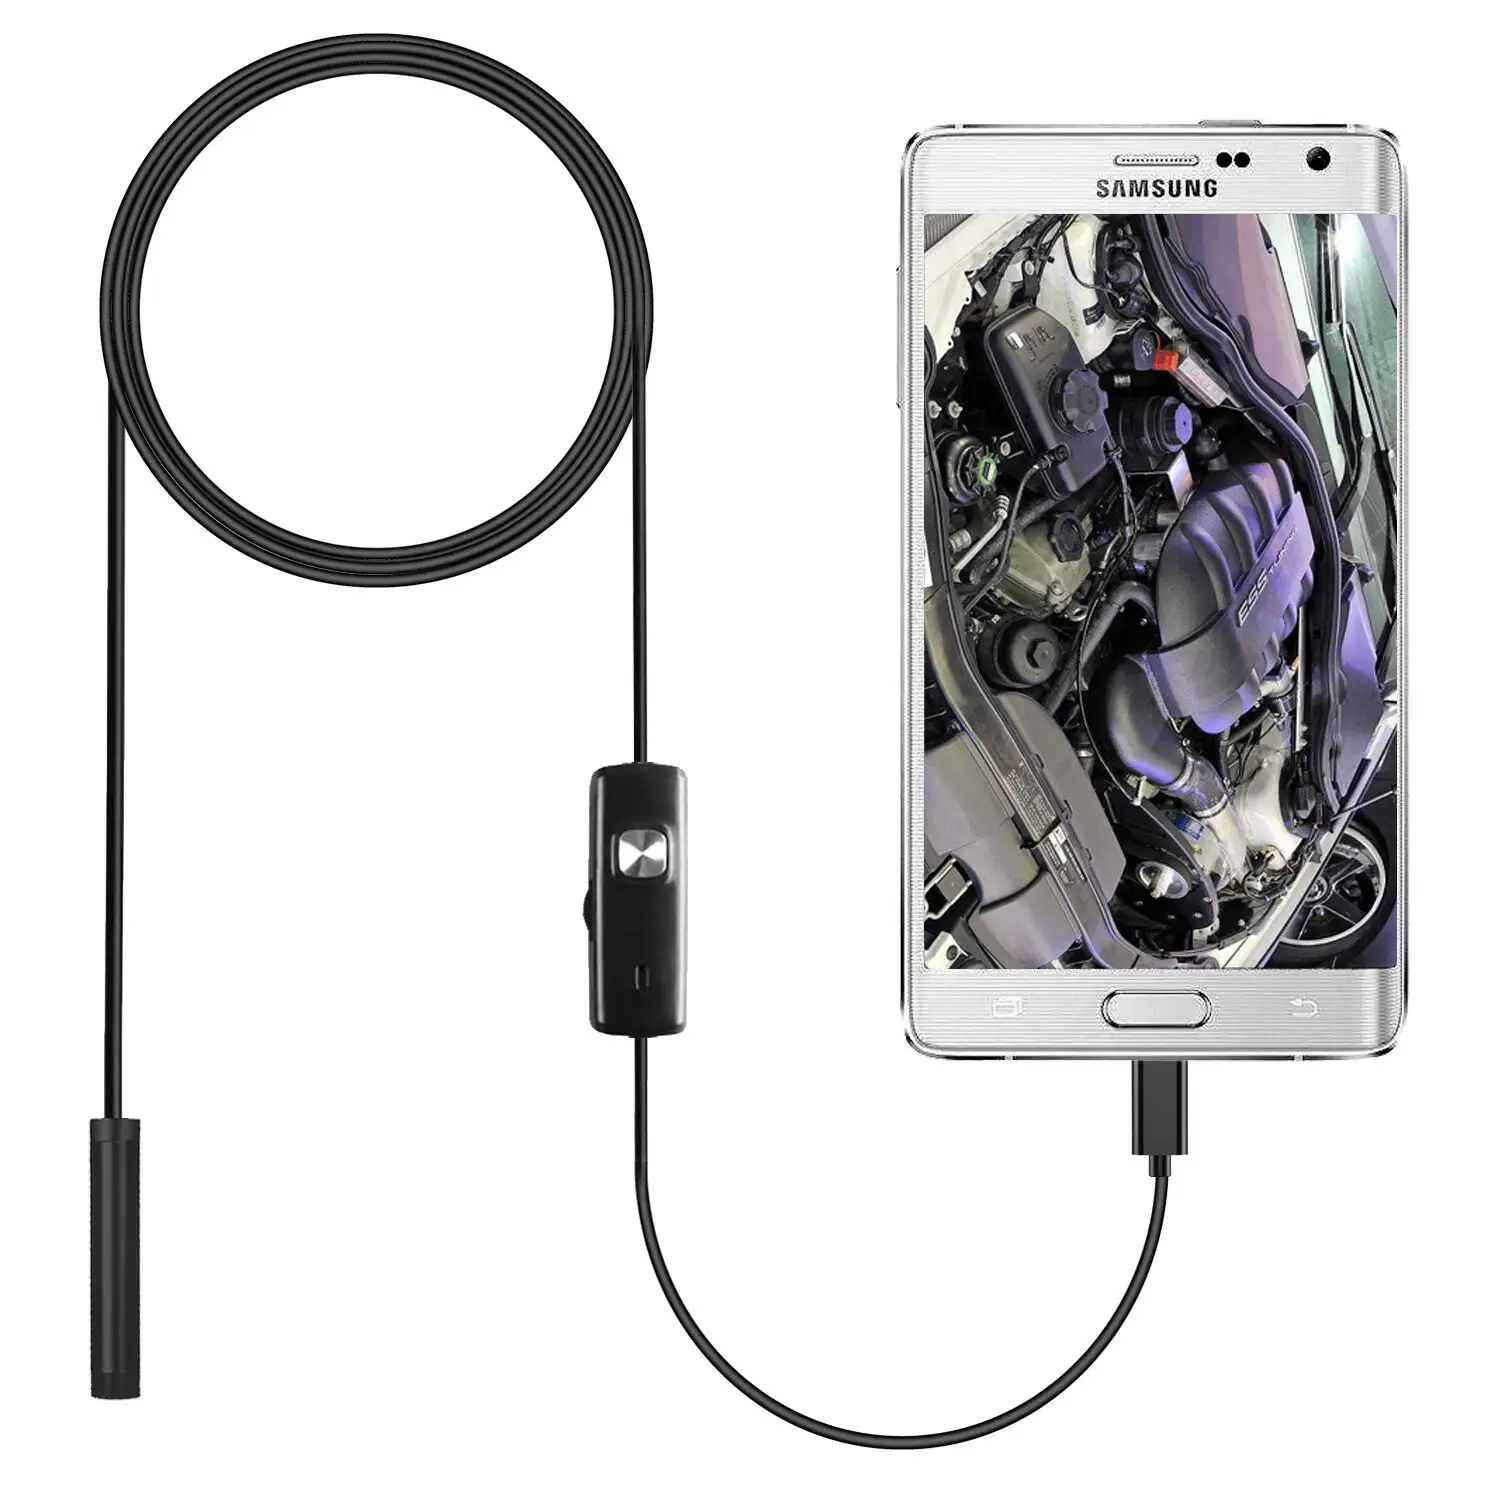 Amazon Hot Vehicle Tools Ip67 7mm Inspection Android Endoscope Usb Borescope Camera Endoscope Camera For Android